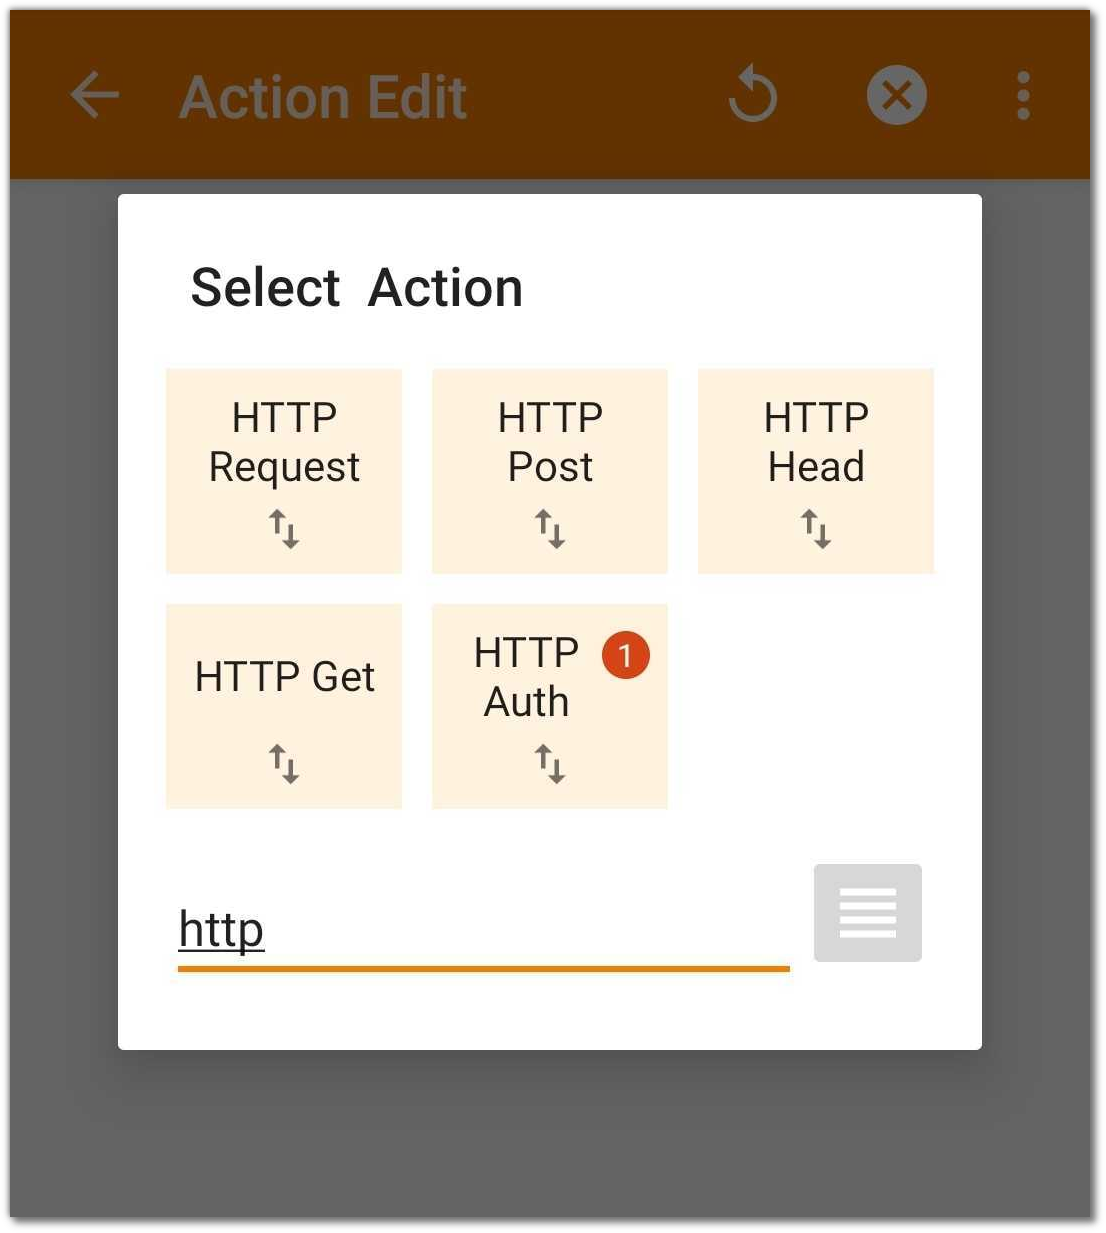 Tasker "select action" dialog showing "HTTP Request" amongst others.